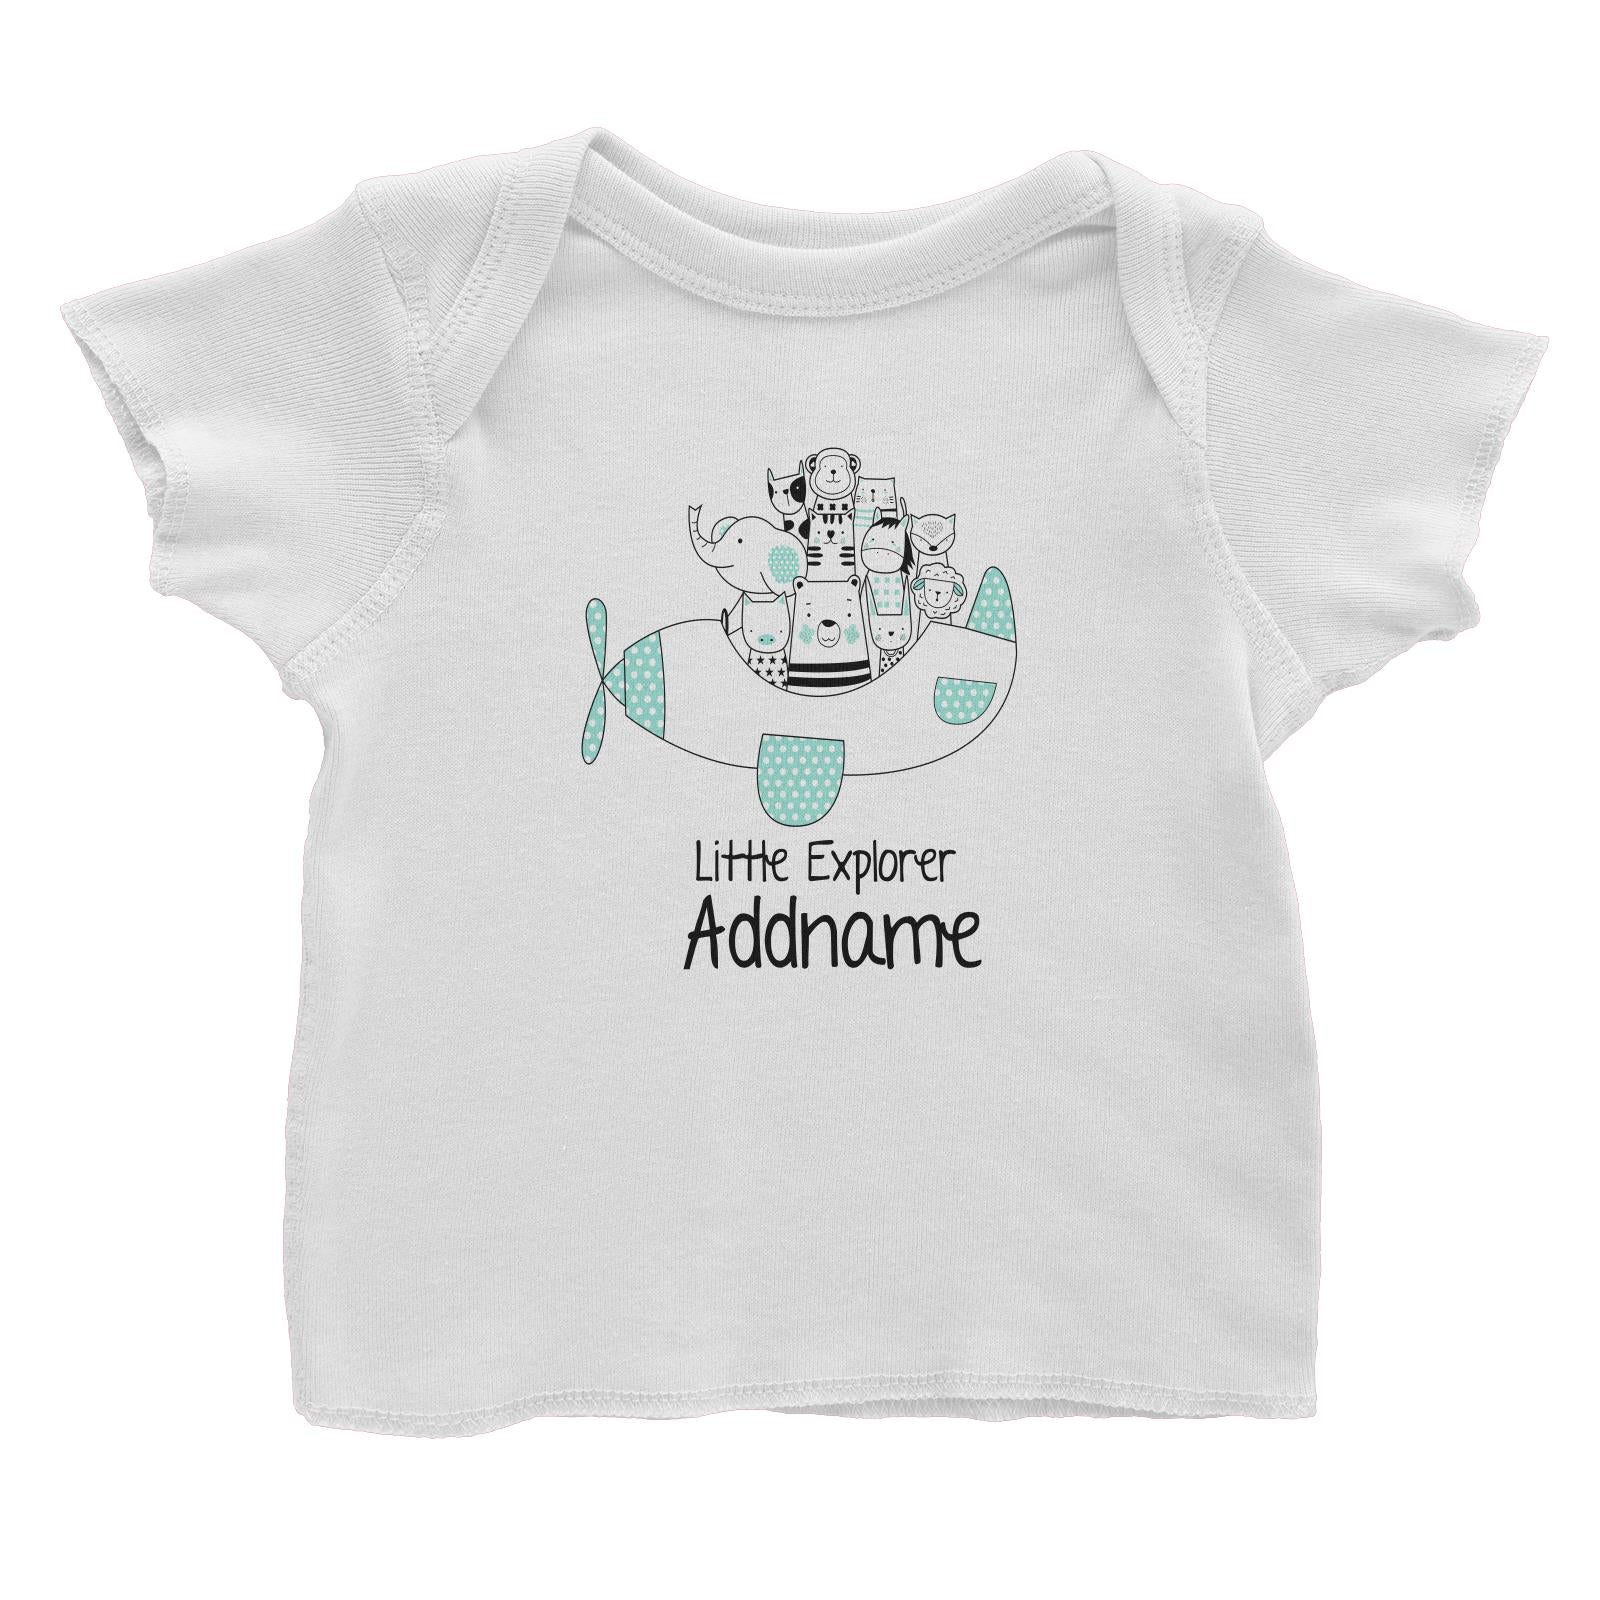 Cute Animals And Friends Series Animal Group Little Explorer Addname Baby T-Shirt